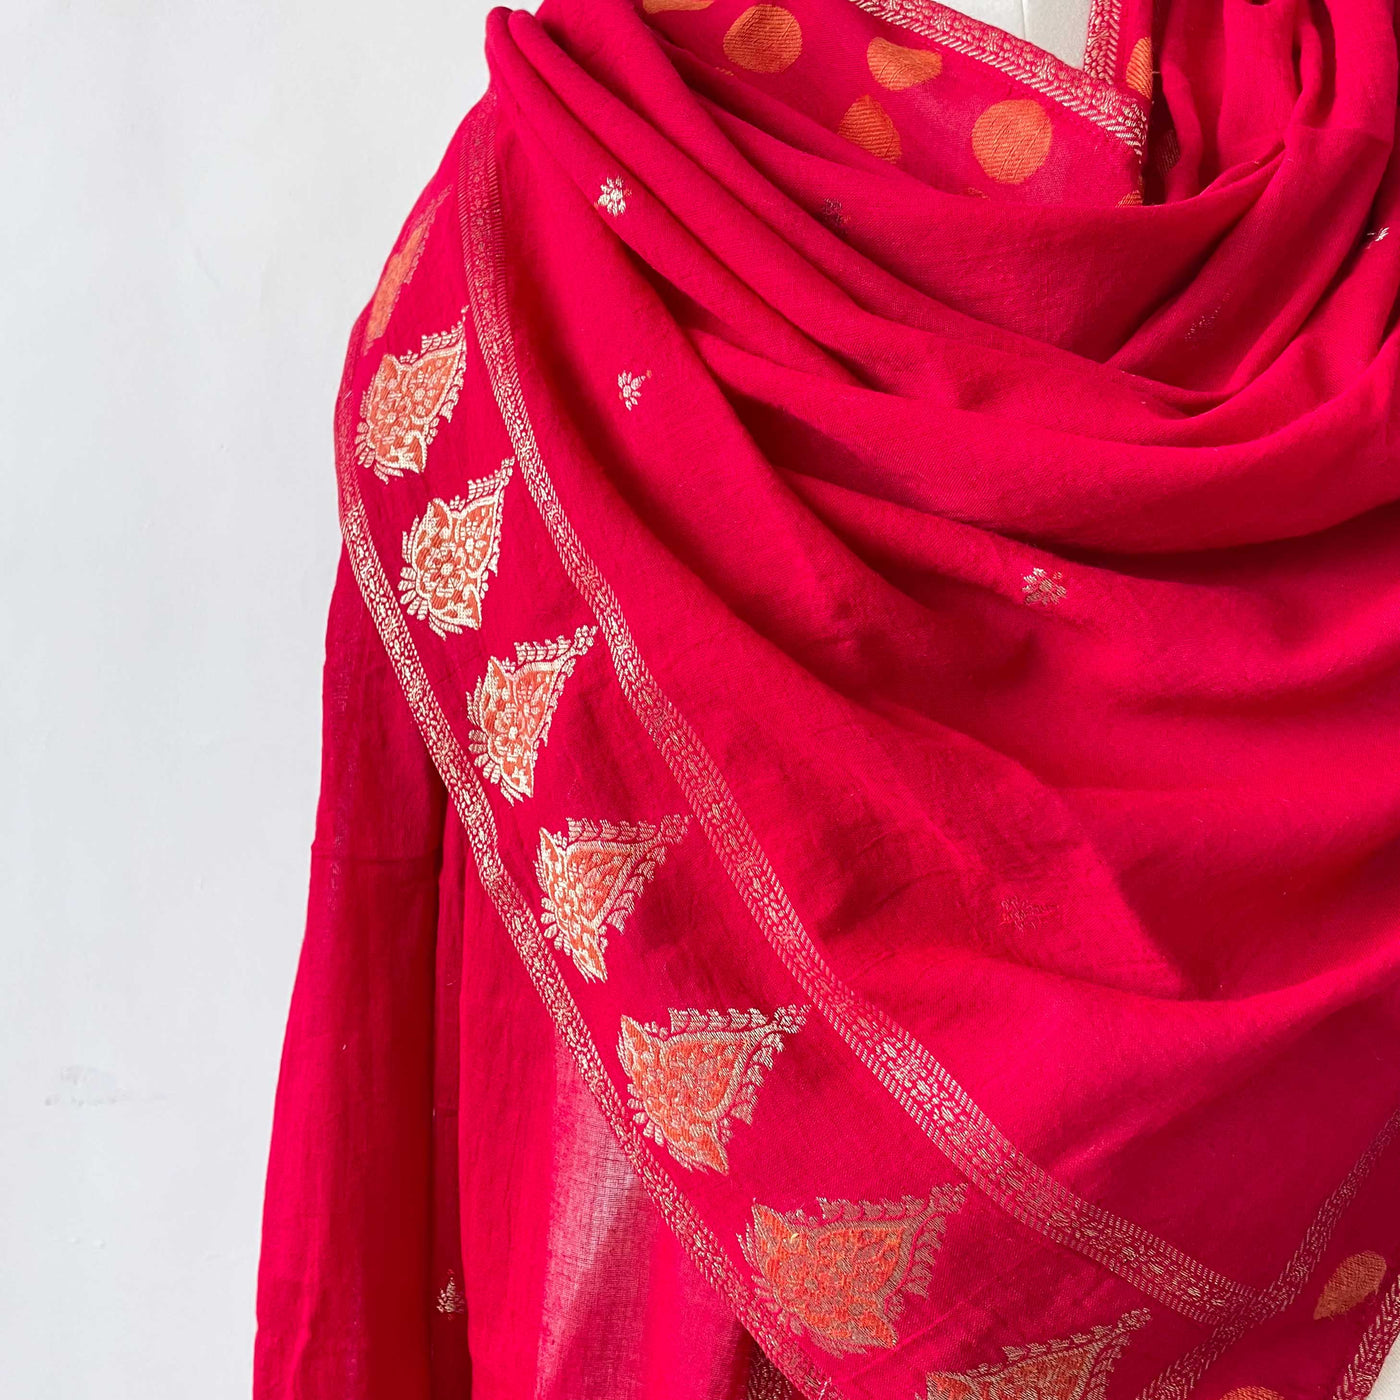 Mix Dupatta Dupatta Bright Red & Gold Floral and Polka Woven Pure Mul Cotton Dupatta (Width 36 Inches)